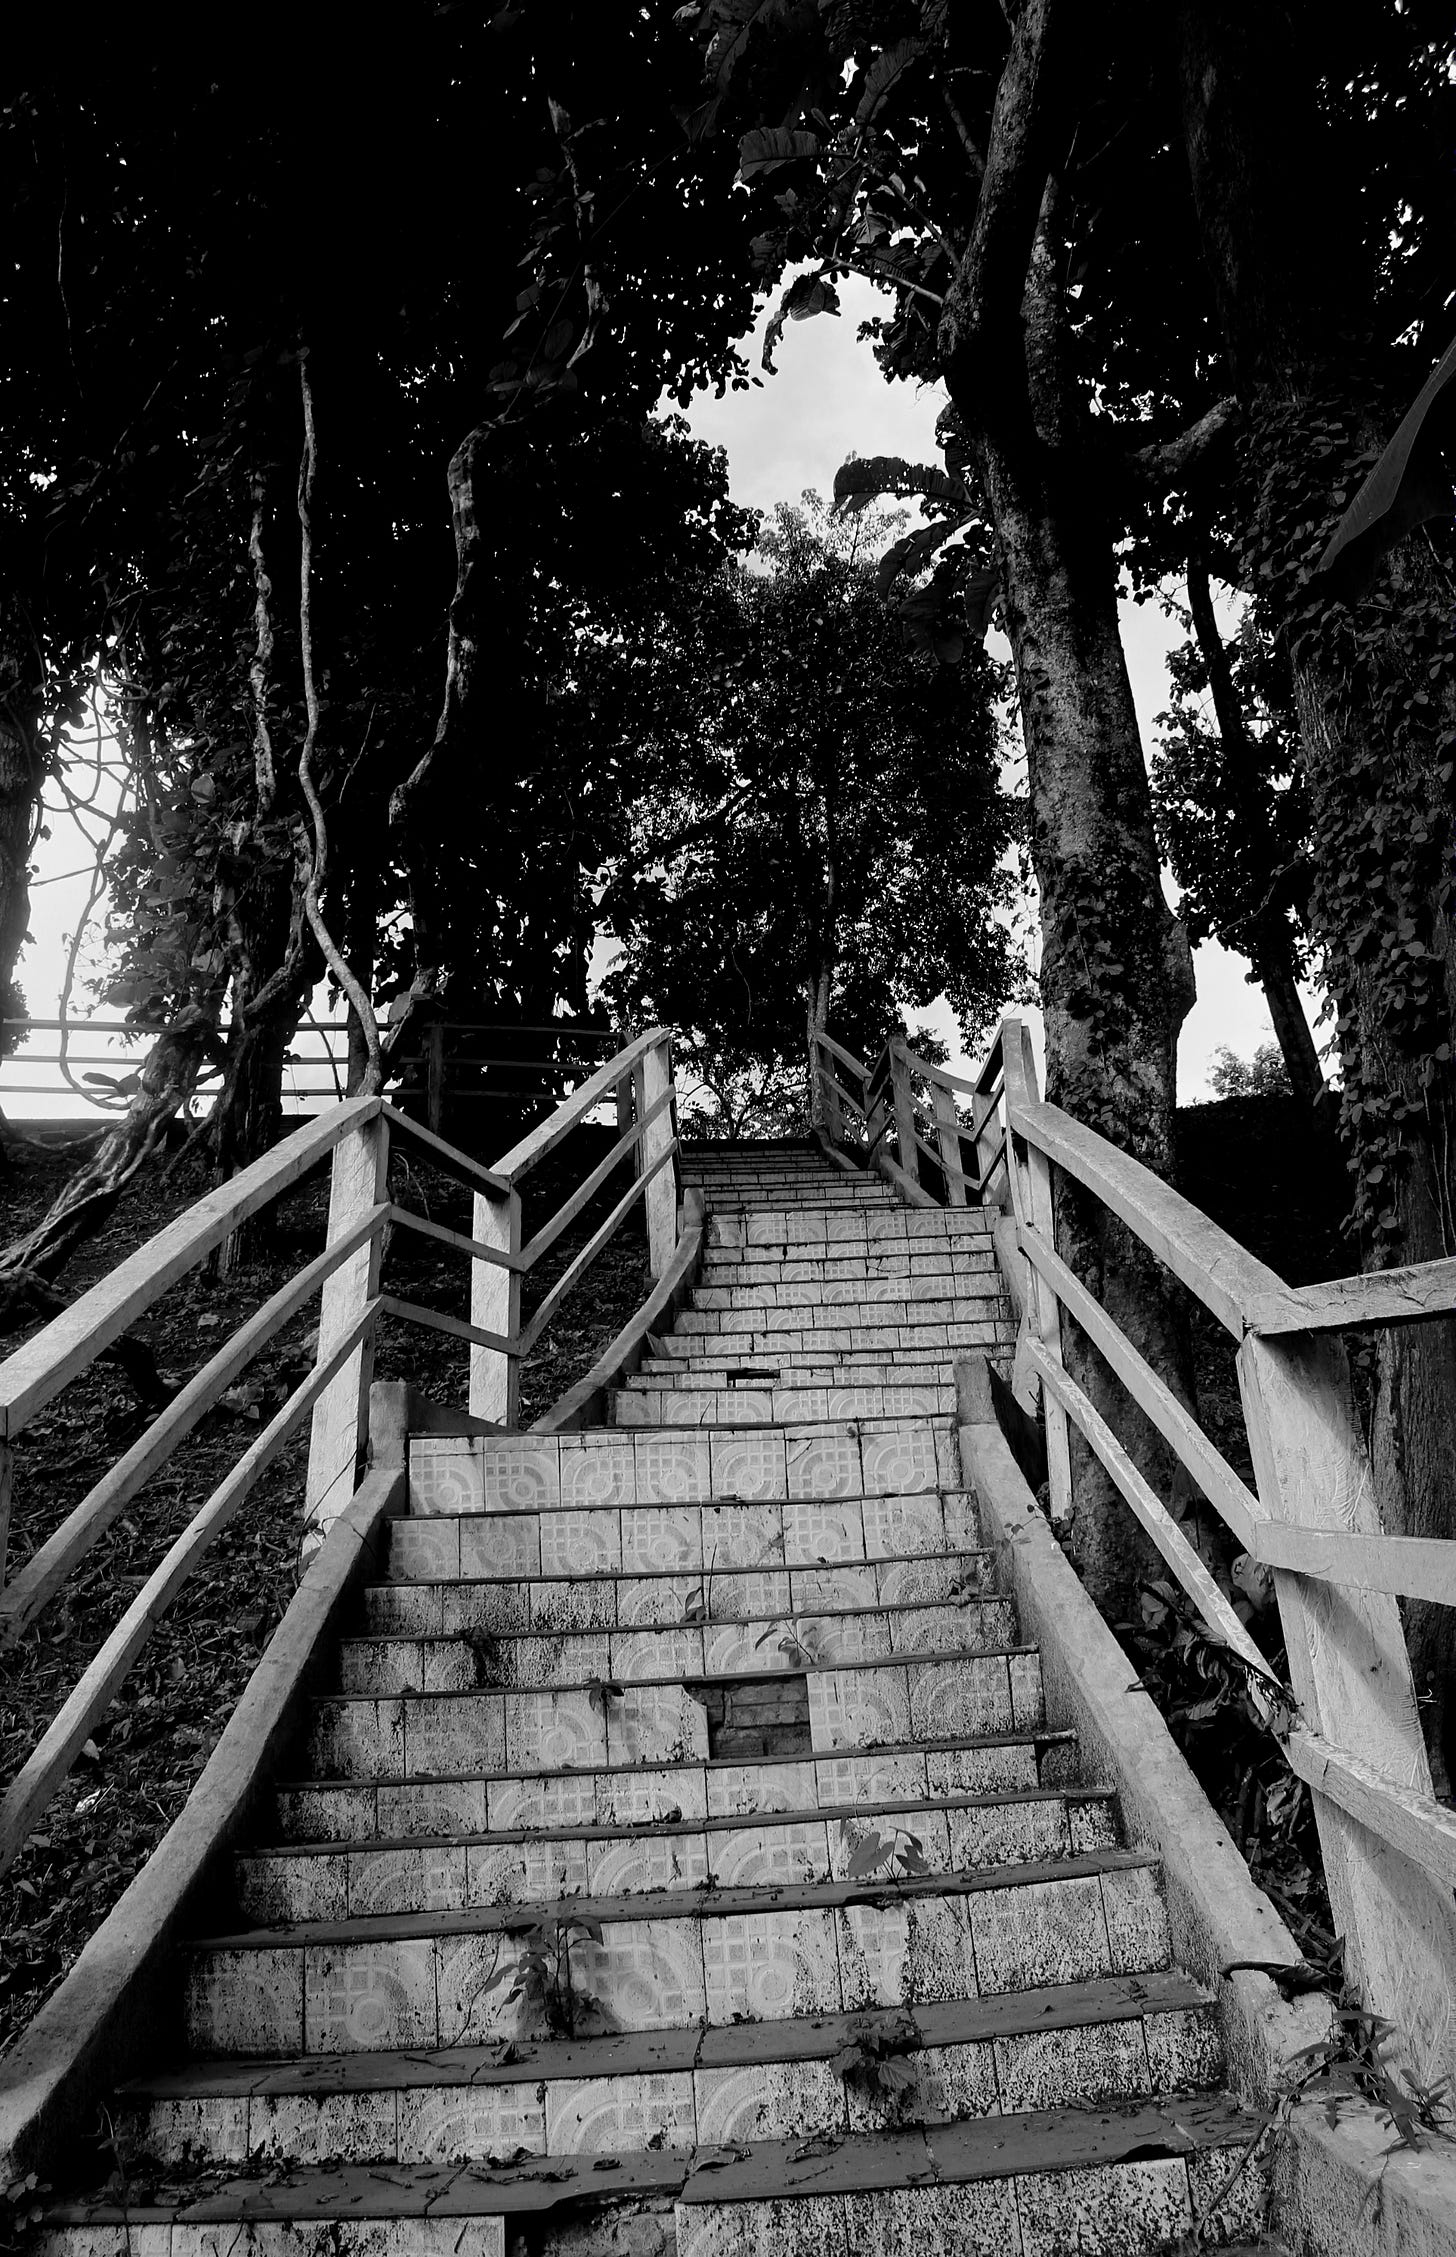 A black and white photo where there are worn steps going up a hill. Trees and vines surround the steps.